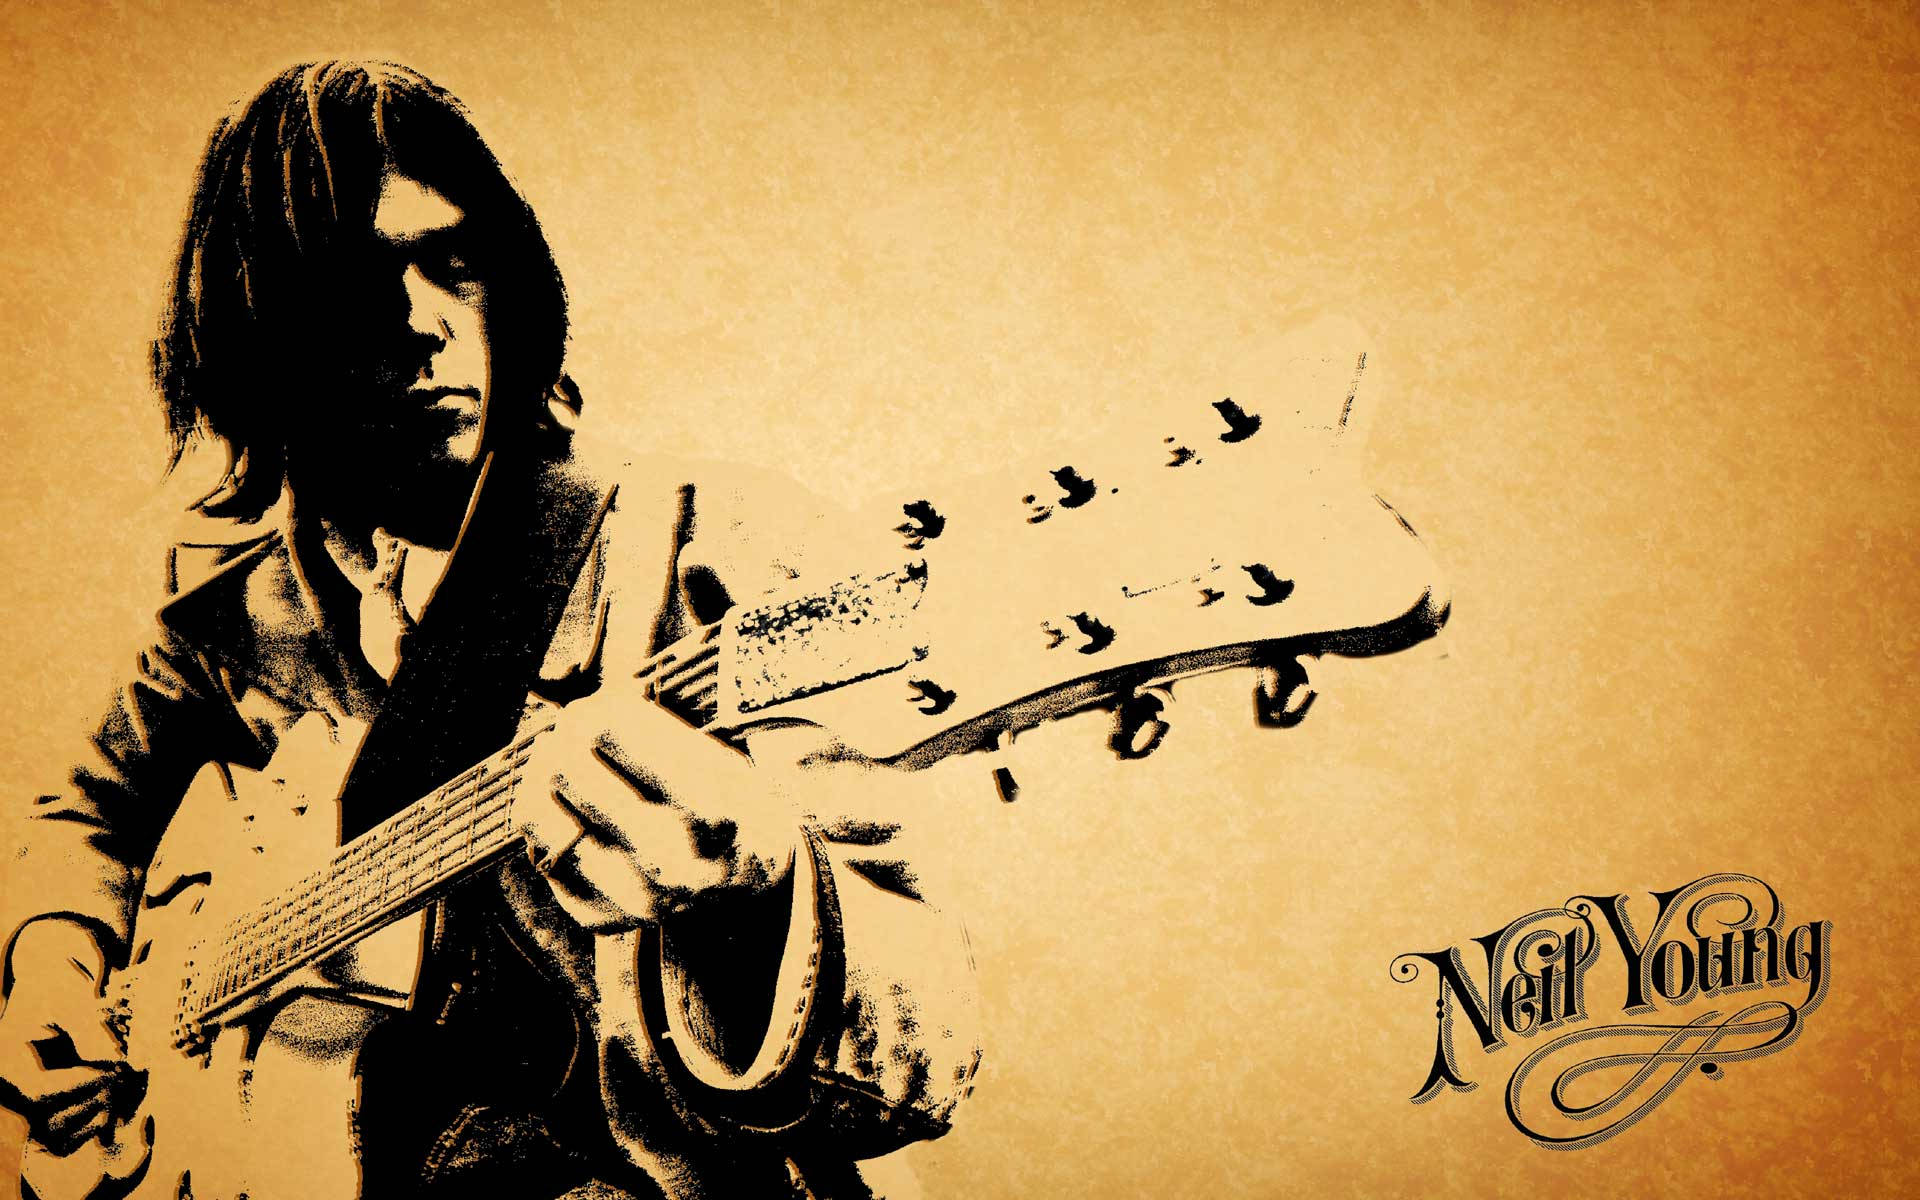 Neil young live rust фото 63